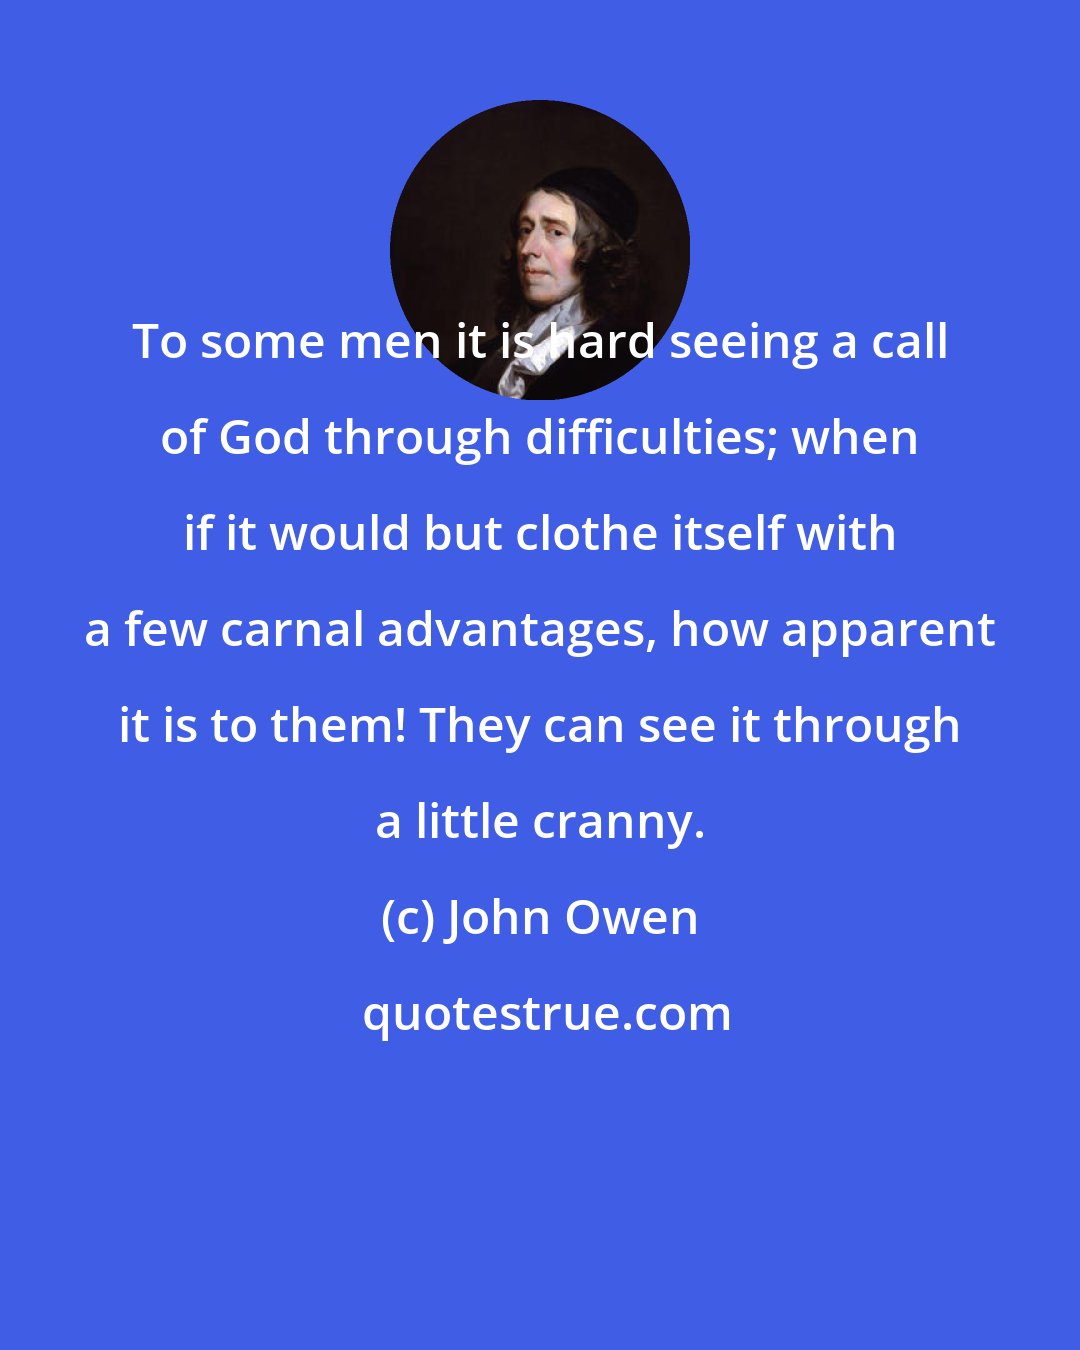 John Owen: To some men it is hard seeing a call of God through difficulties; when if it would but clothe itself with a few carnal advantages, how apparent it is to them! They can see it through a little cranny.